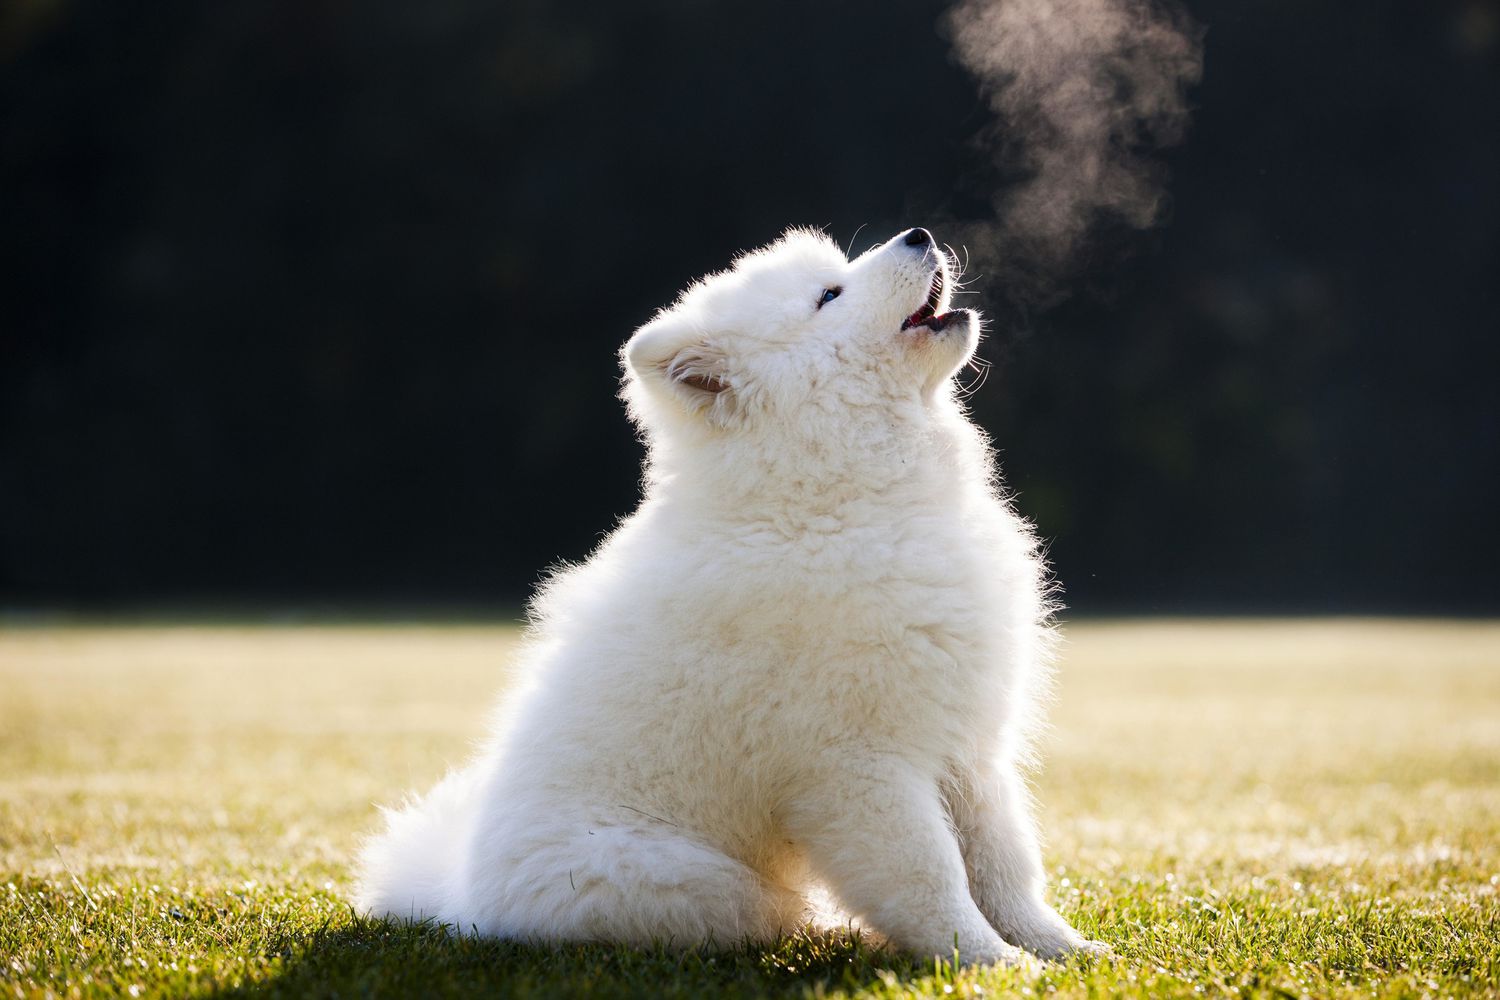 Samoyed puppy howling outside in the grass